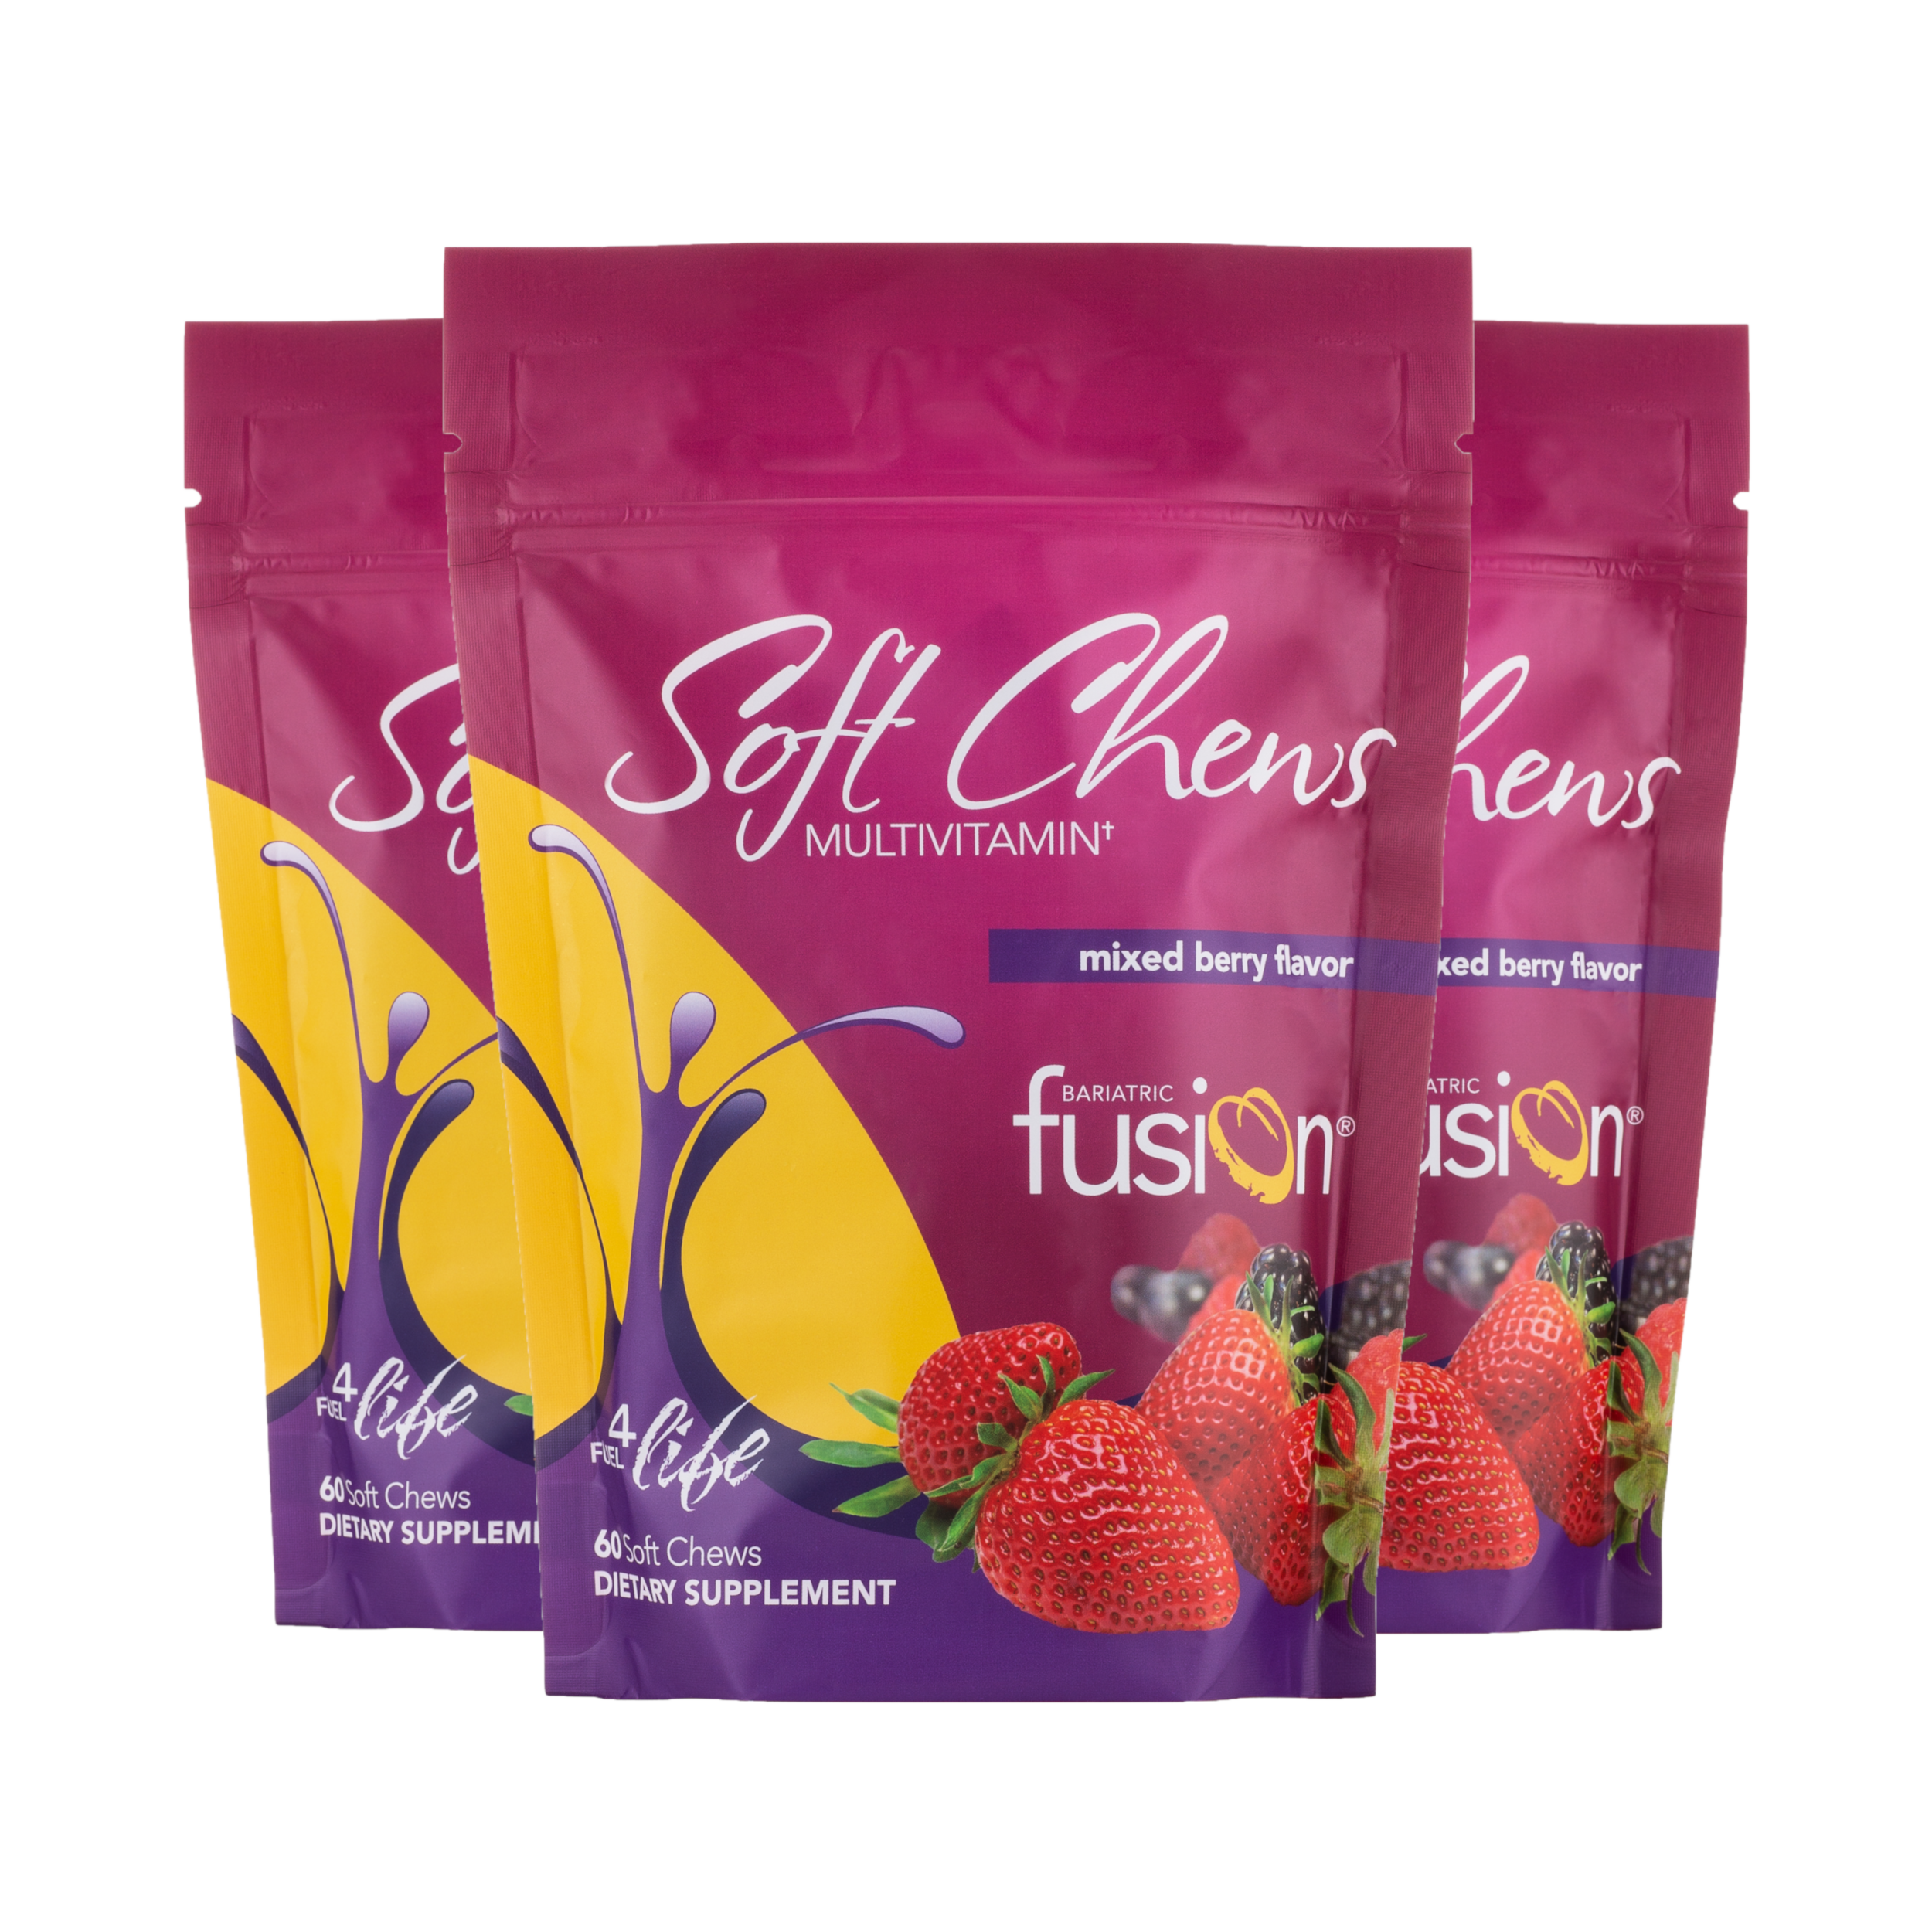 Bundle and Save - Mixed Berry Soft Chews Bariatric Multivitamin - Bariatric Fusion